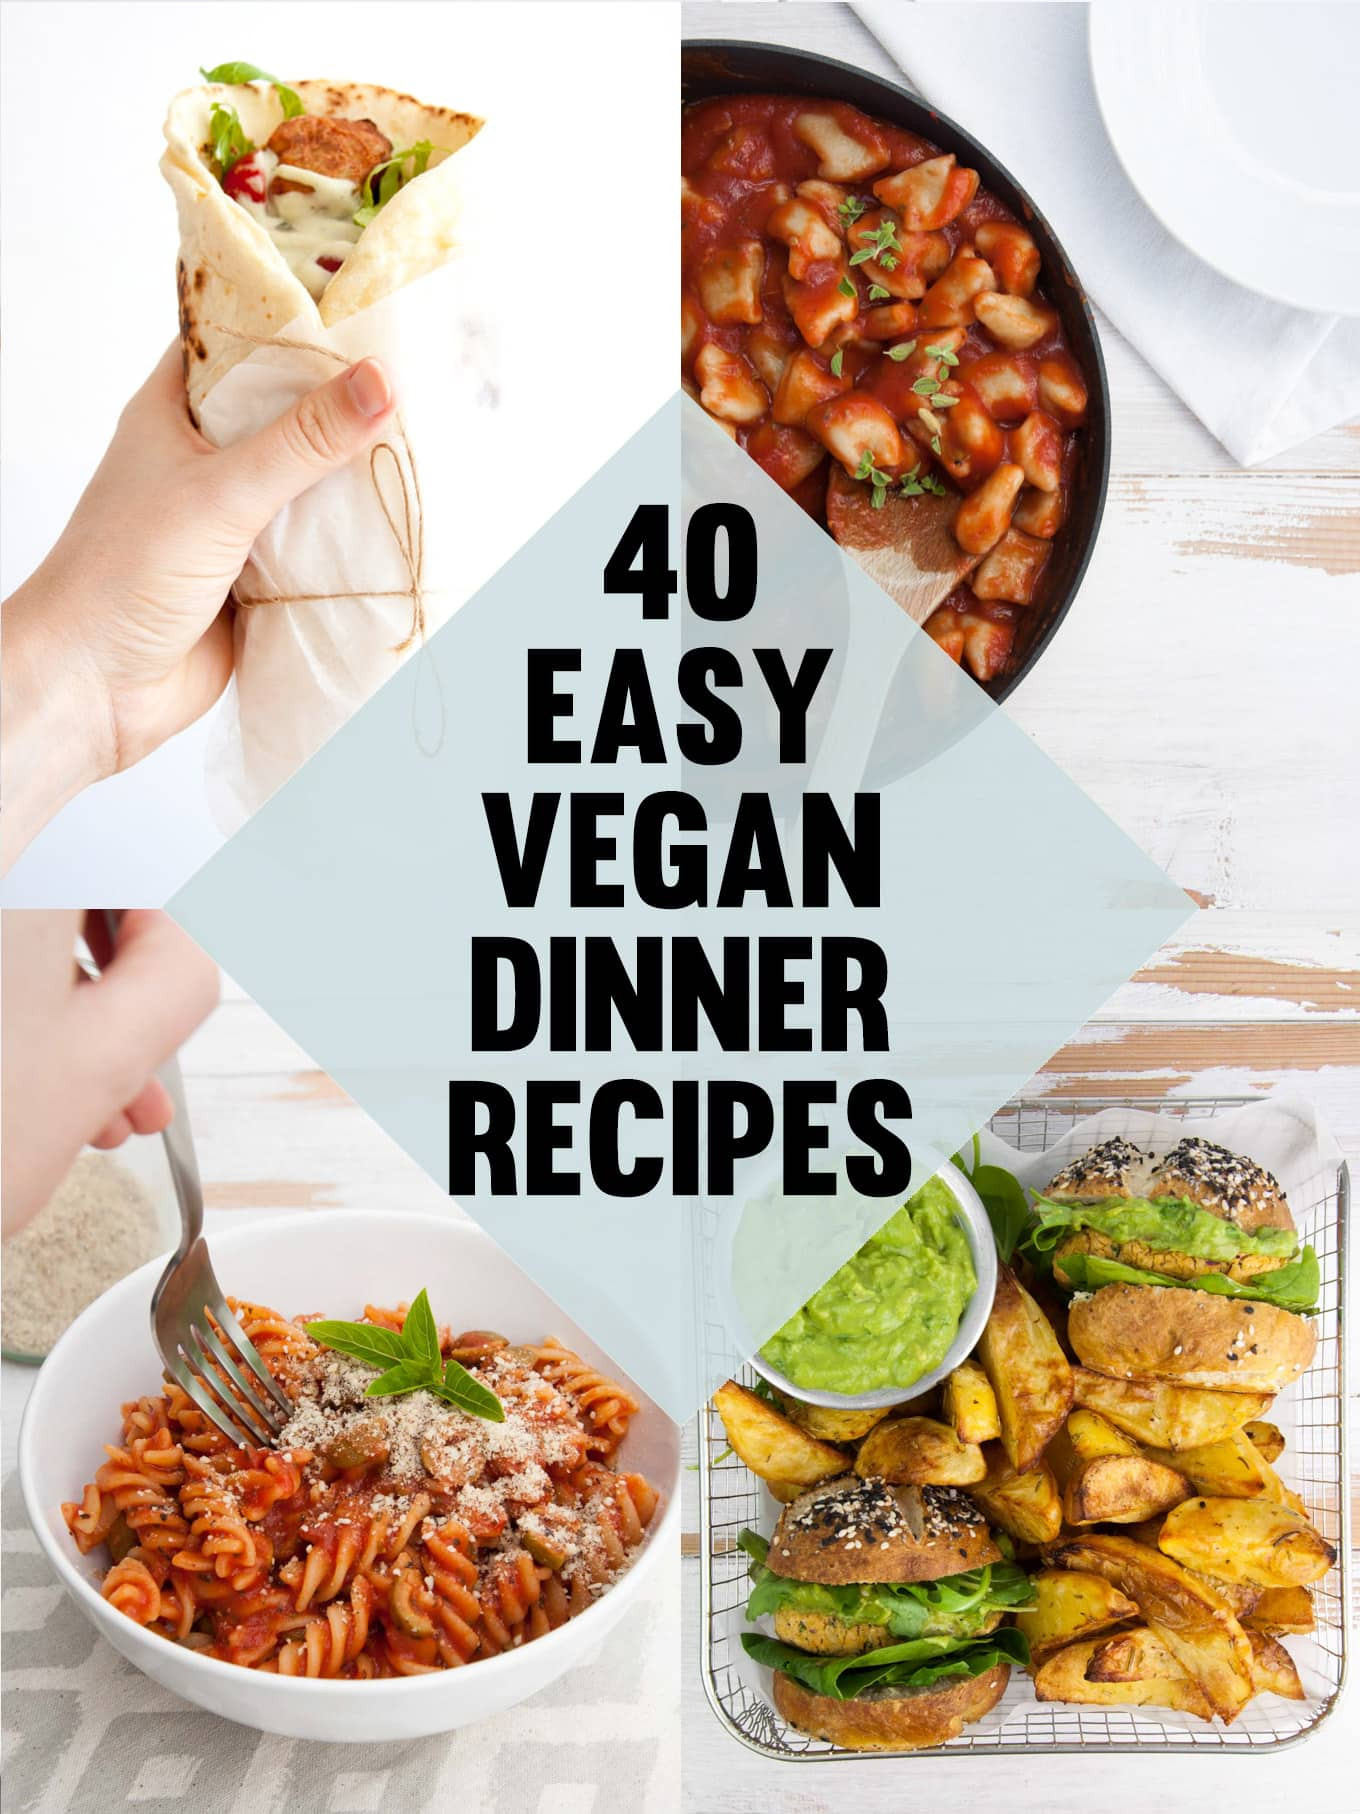 The Best Ideas for Best Vegan Dinner Recipes - Home, Family, Style and